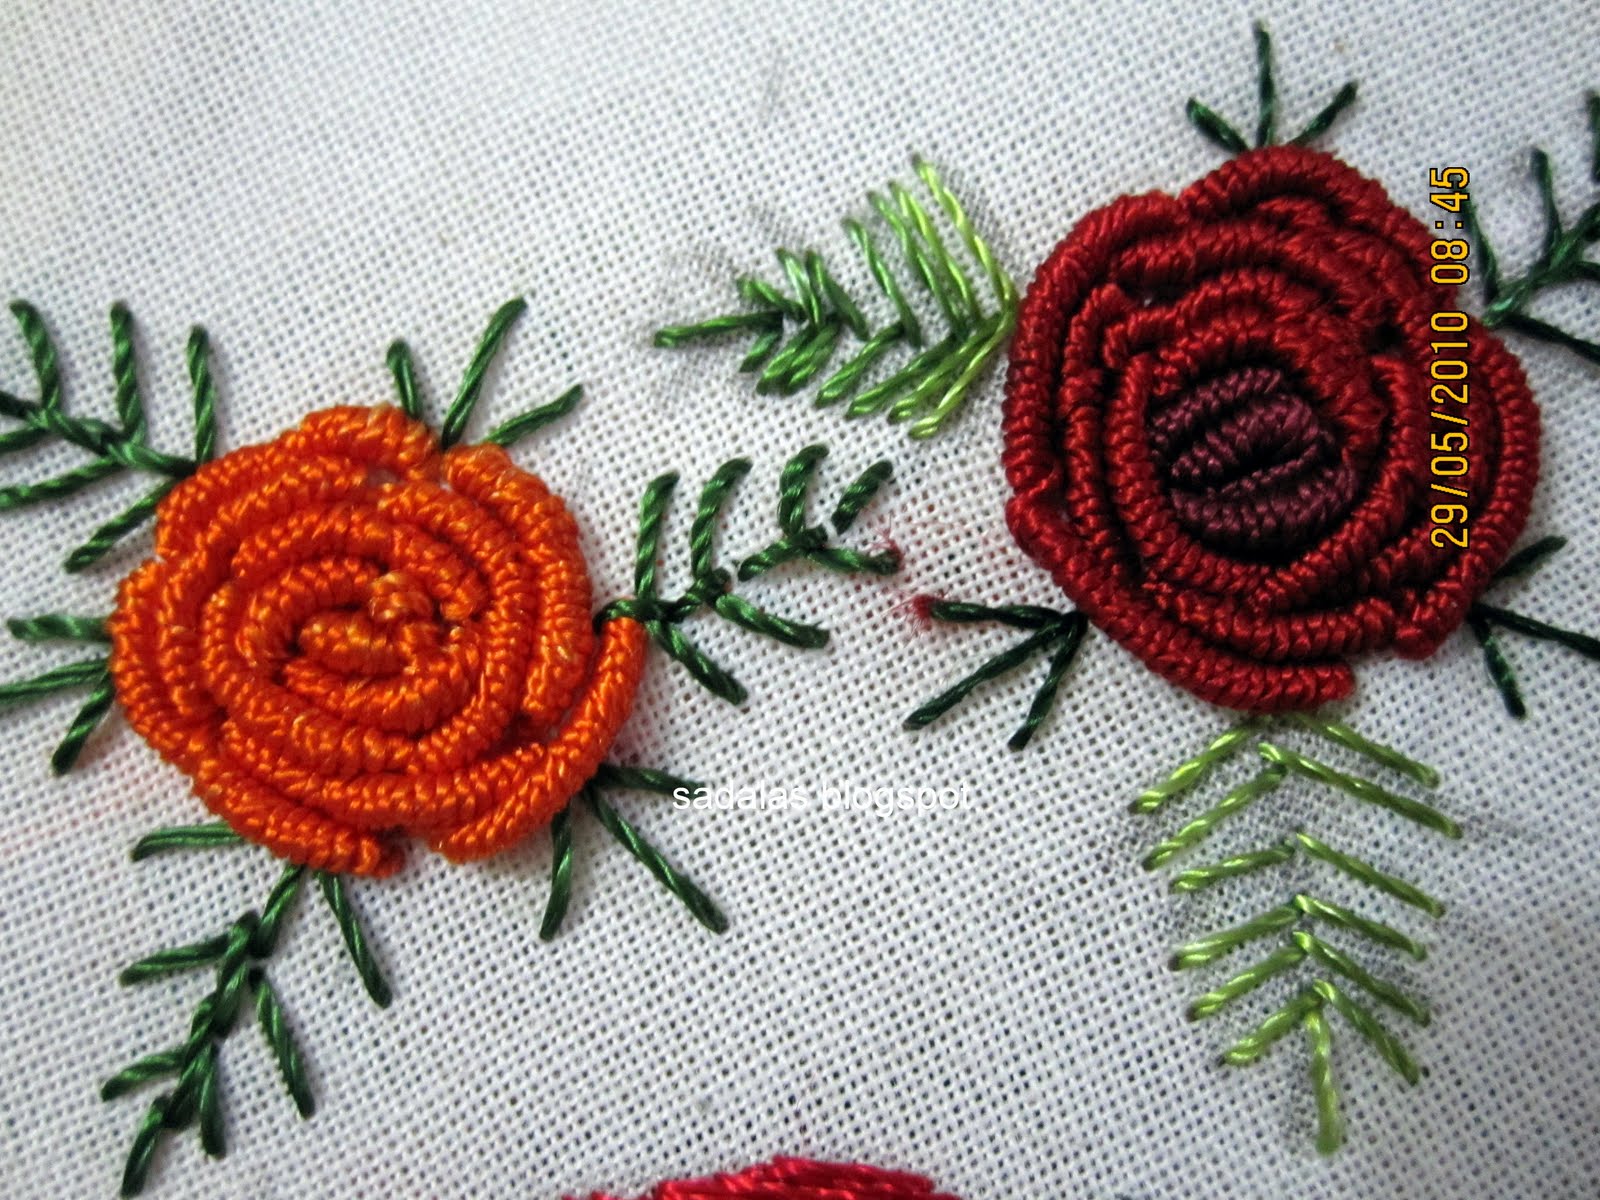 Handmade Embroidery Patterns on Etsy - Patterns for hand &amp; machine